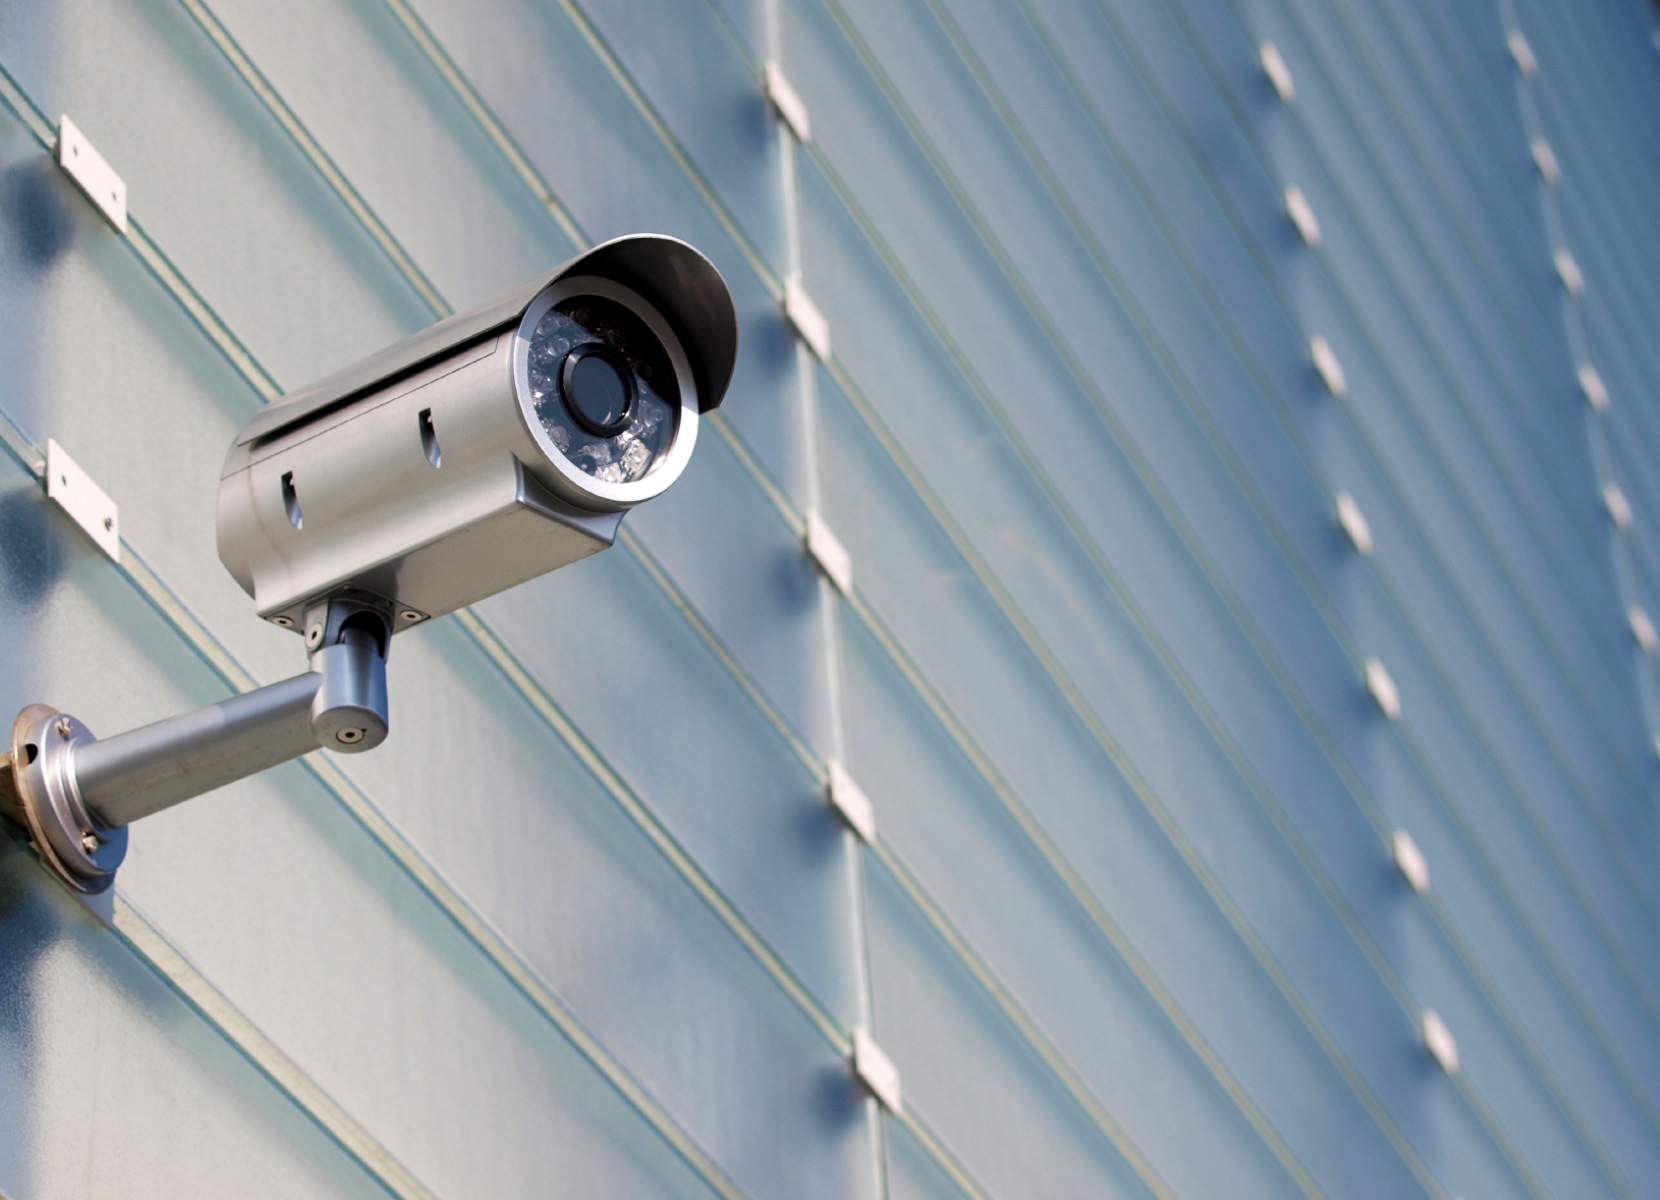 8 Reasons Why You Should Have A CCTV System At Home